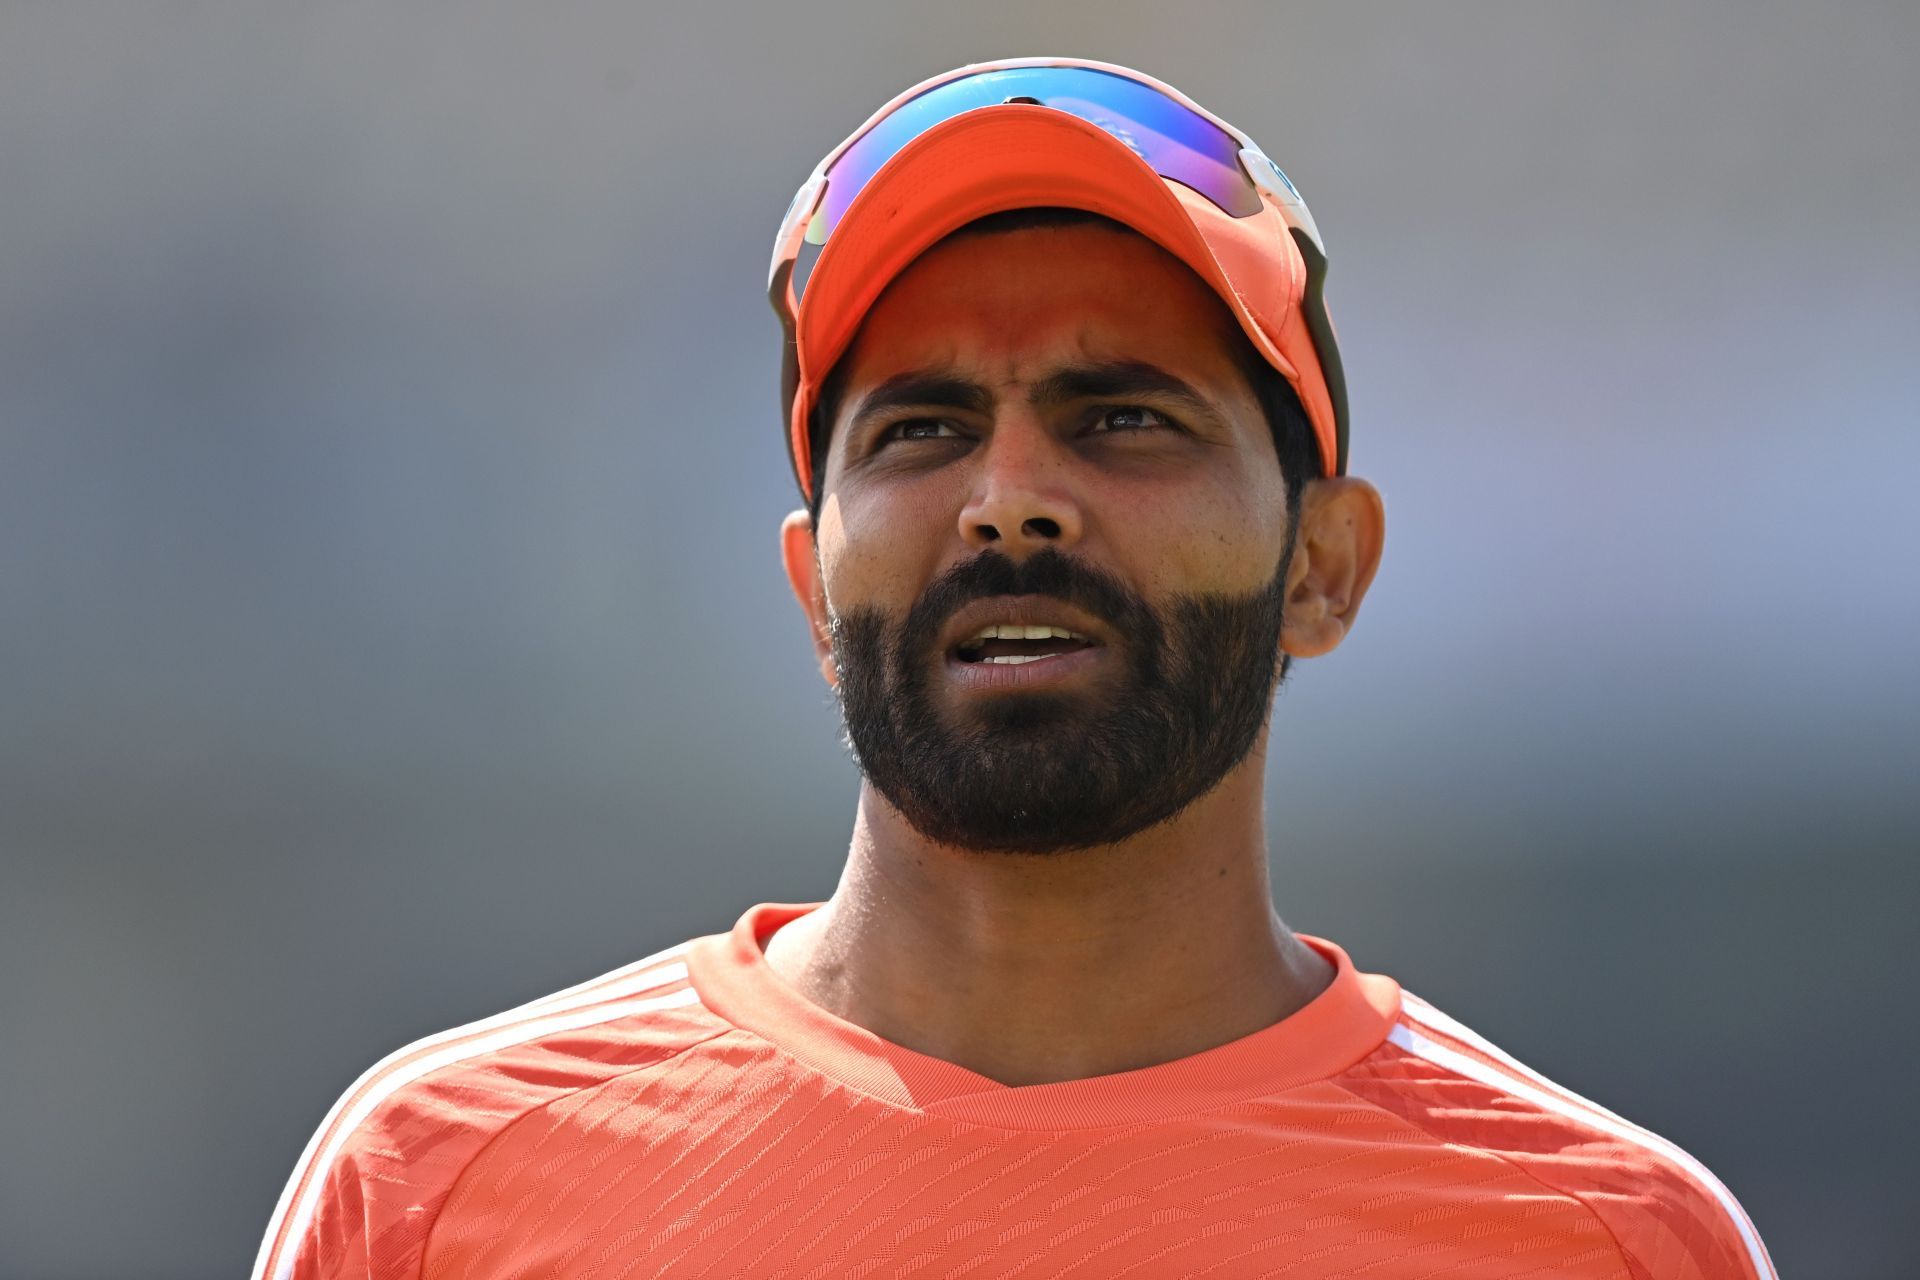 Ravindra Jadeja has recovered from the hamstring injury that kept him out of the second Test